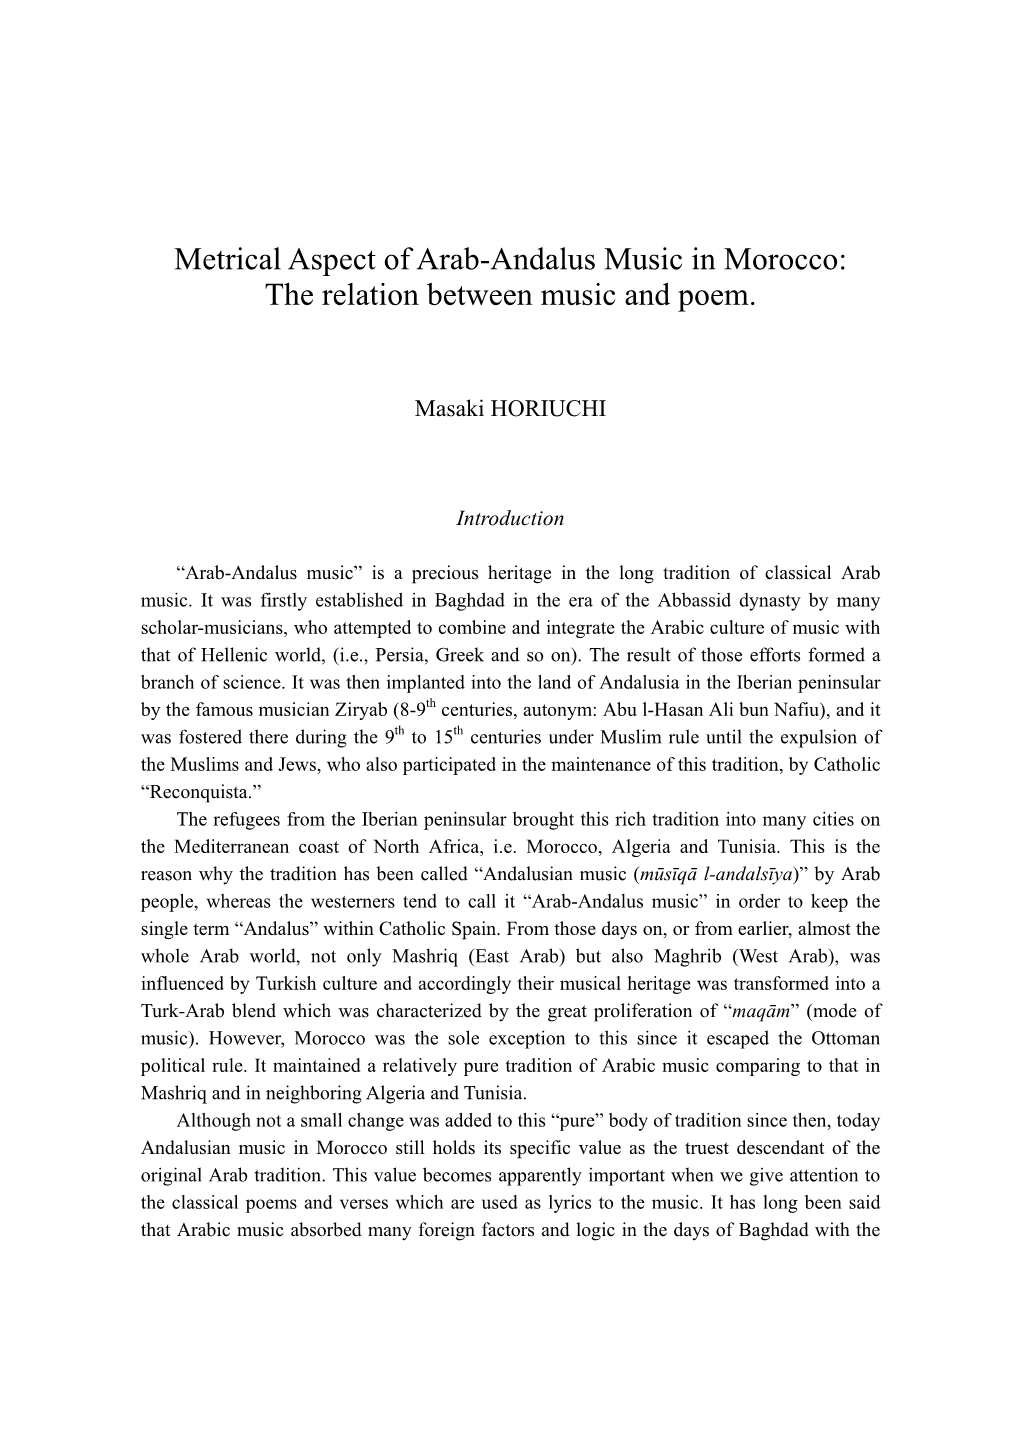 Metrical Aspect of Arab-Andalus Music in Morocco: the Relation Between Music and Poem